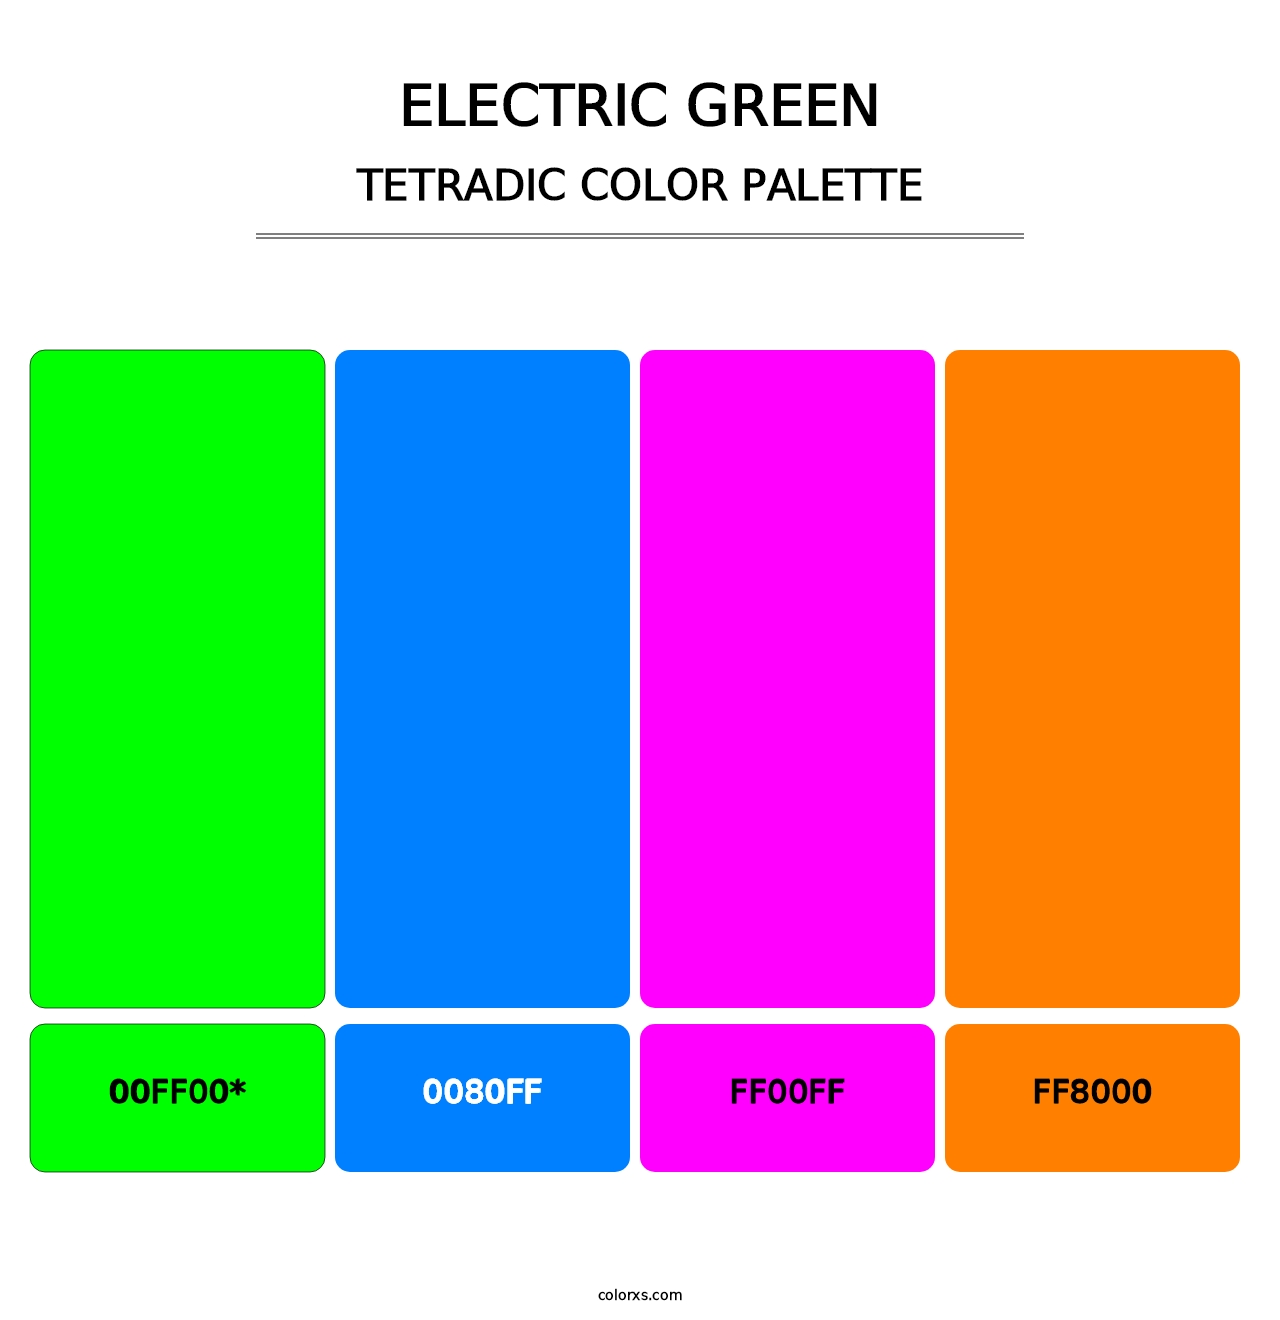 Electric Green - Tetradic Color Palette